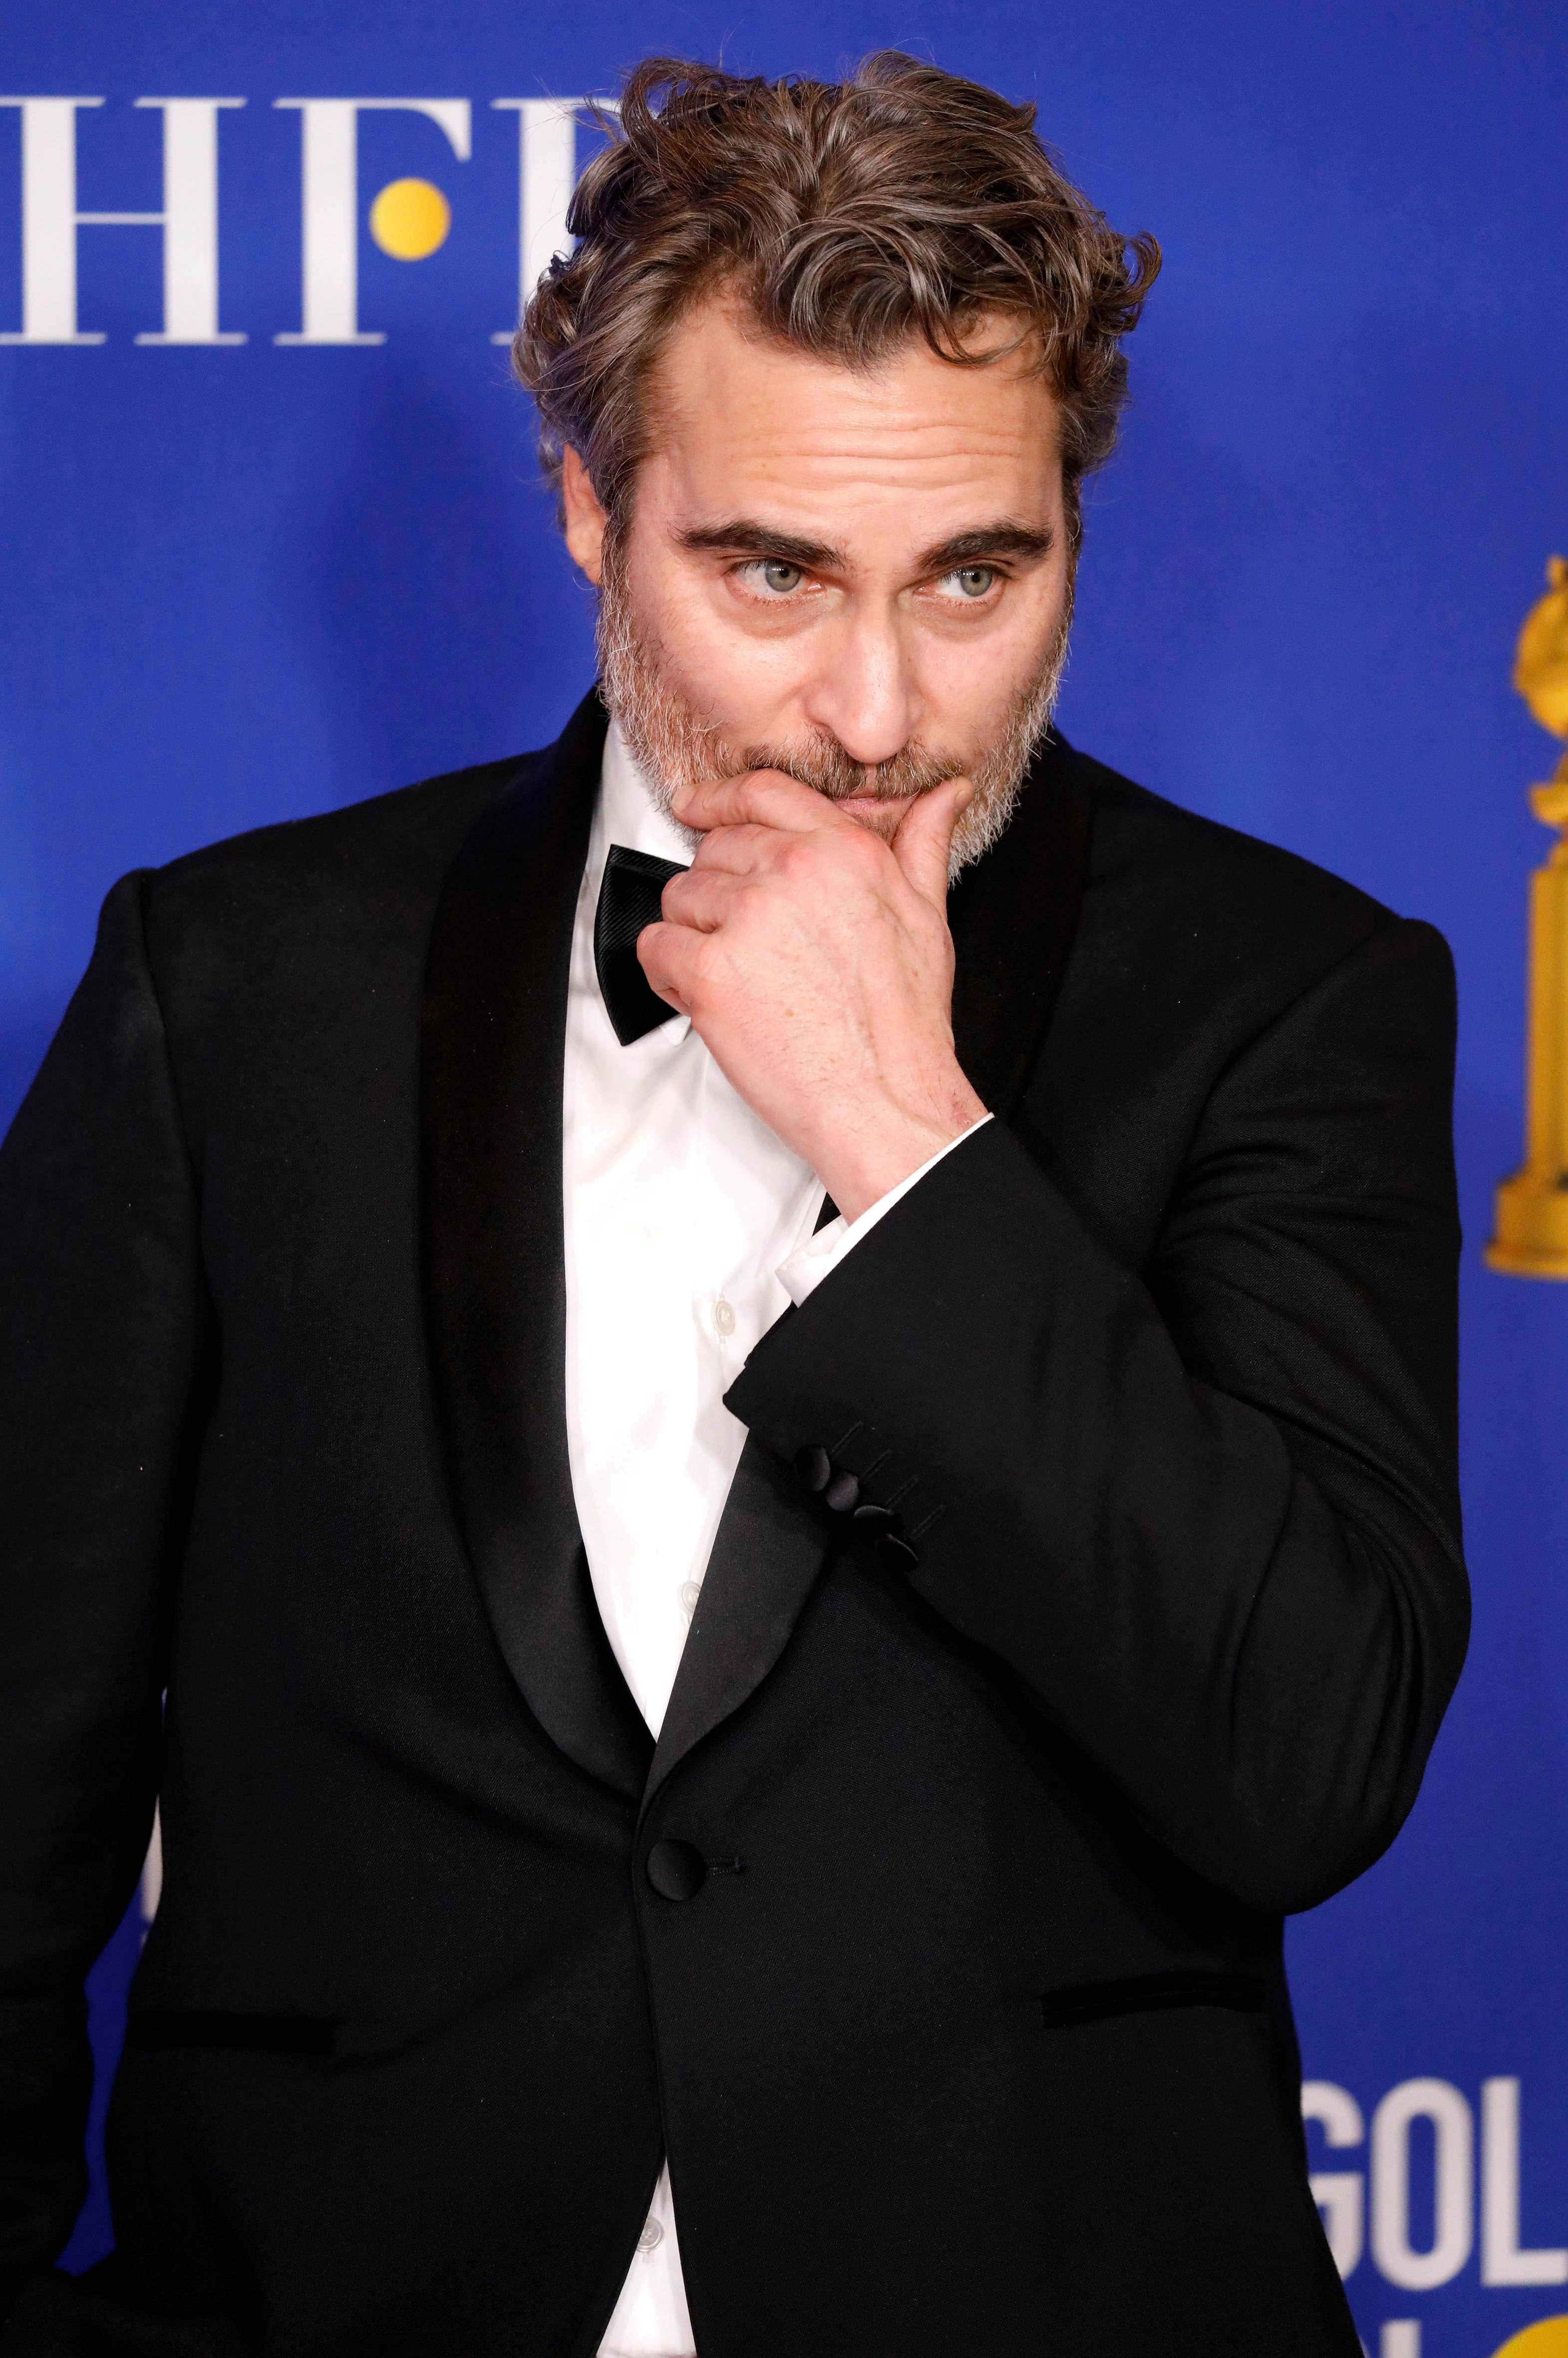 Joaquin Phoenix during the press room of the 77th Annual Golden Globe Awards at The Beverly Hilton Hotel on January 05, 2020 in Beverly Hills, California. | Source: Getty Images